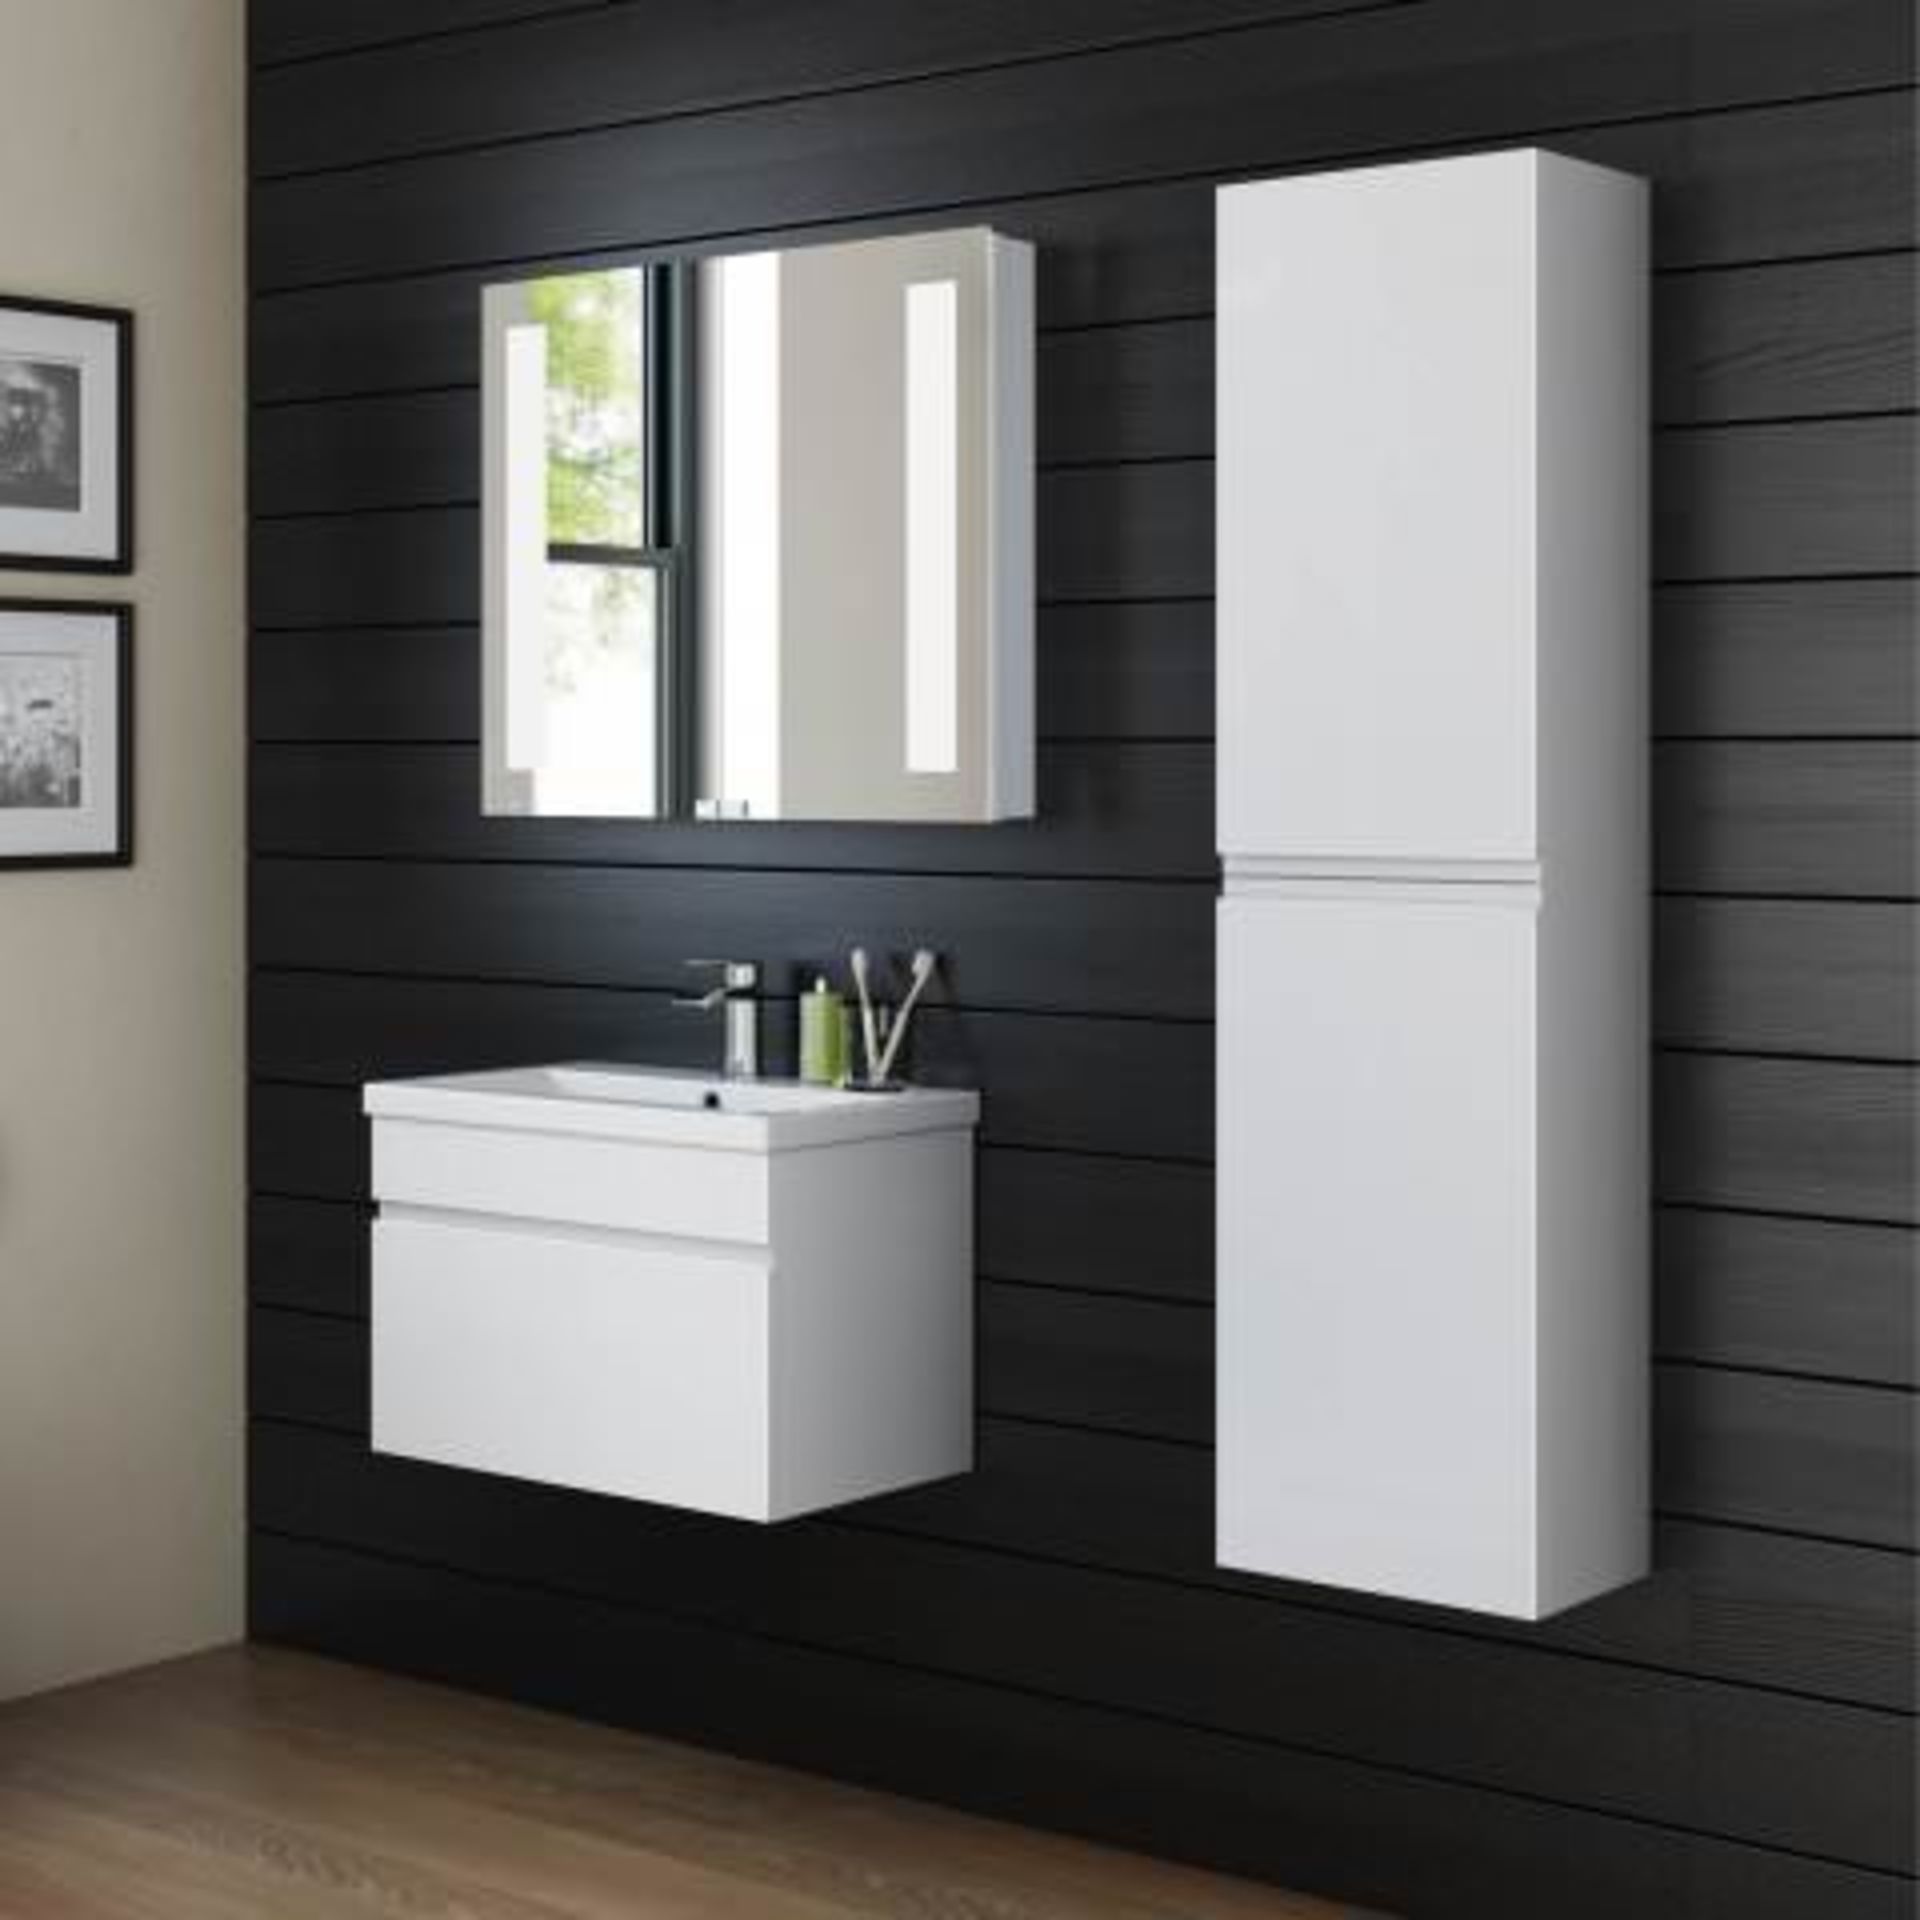 (H222) 1400mm Trent Gloss White Tall Storage Cabinet - Wall Hung. RRP £259.99. Our Trent Gloss White - Image 3 of 3